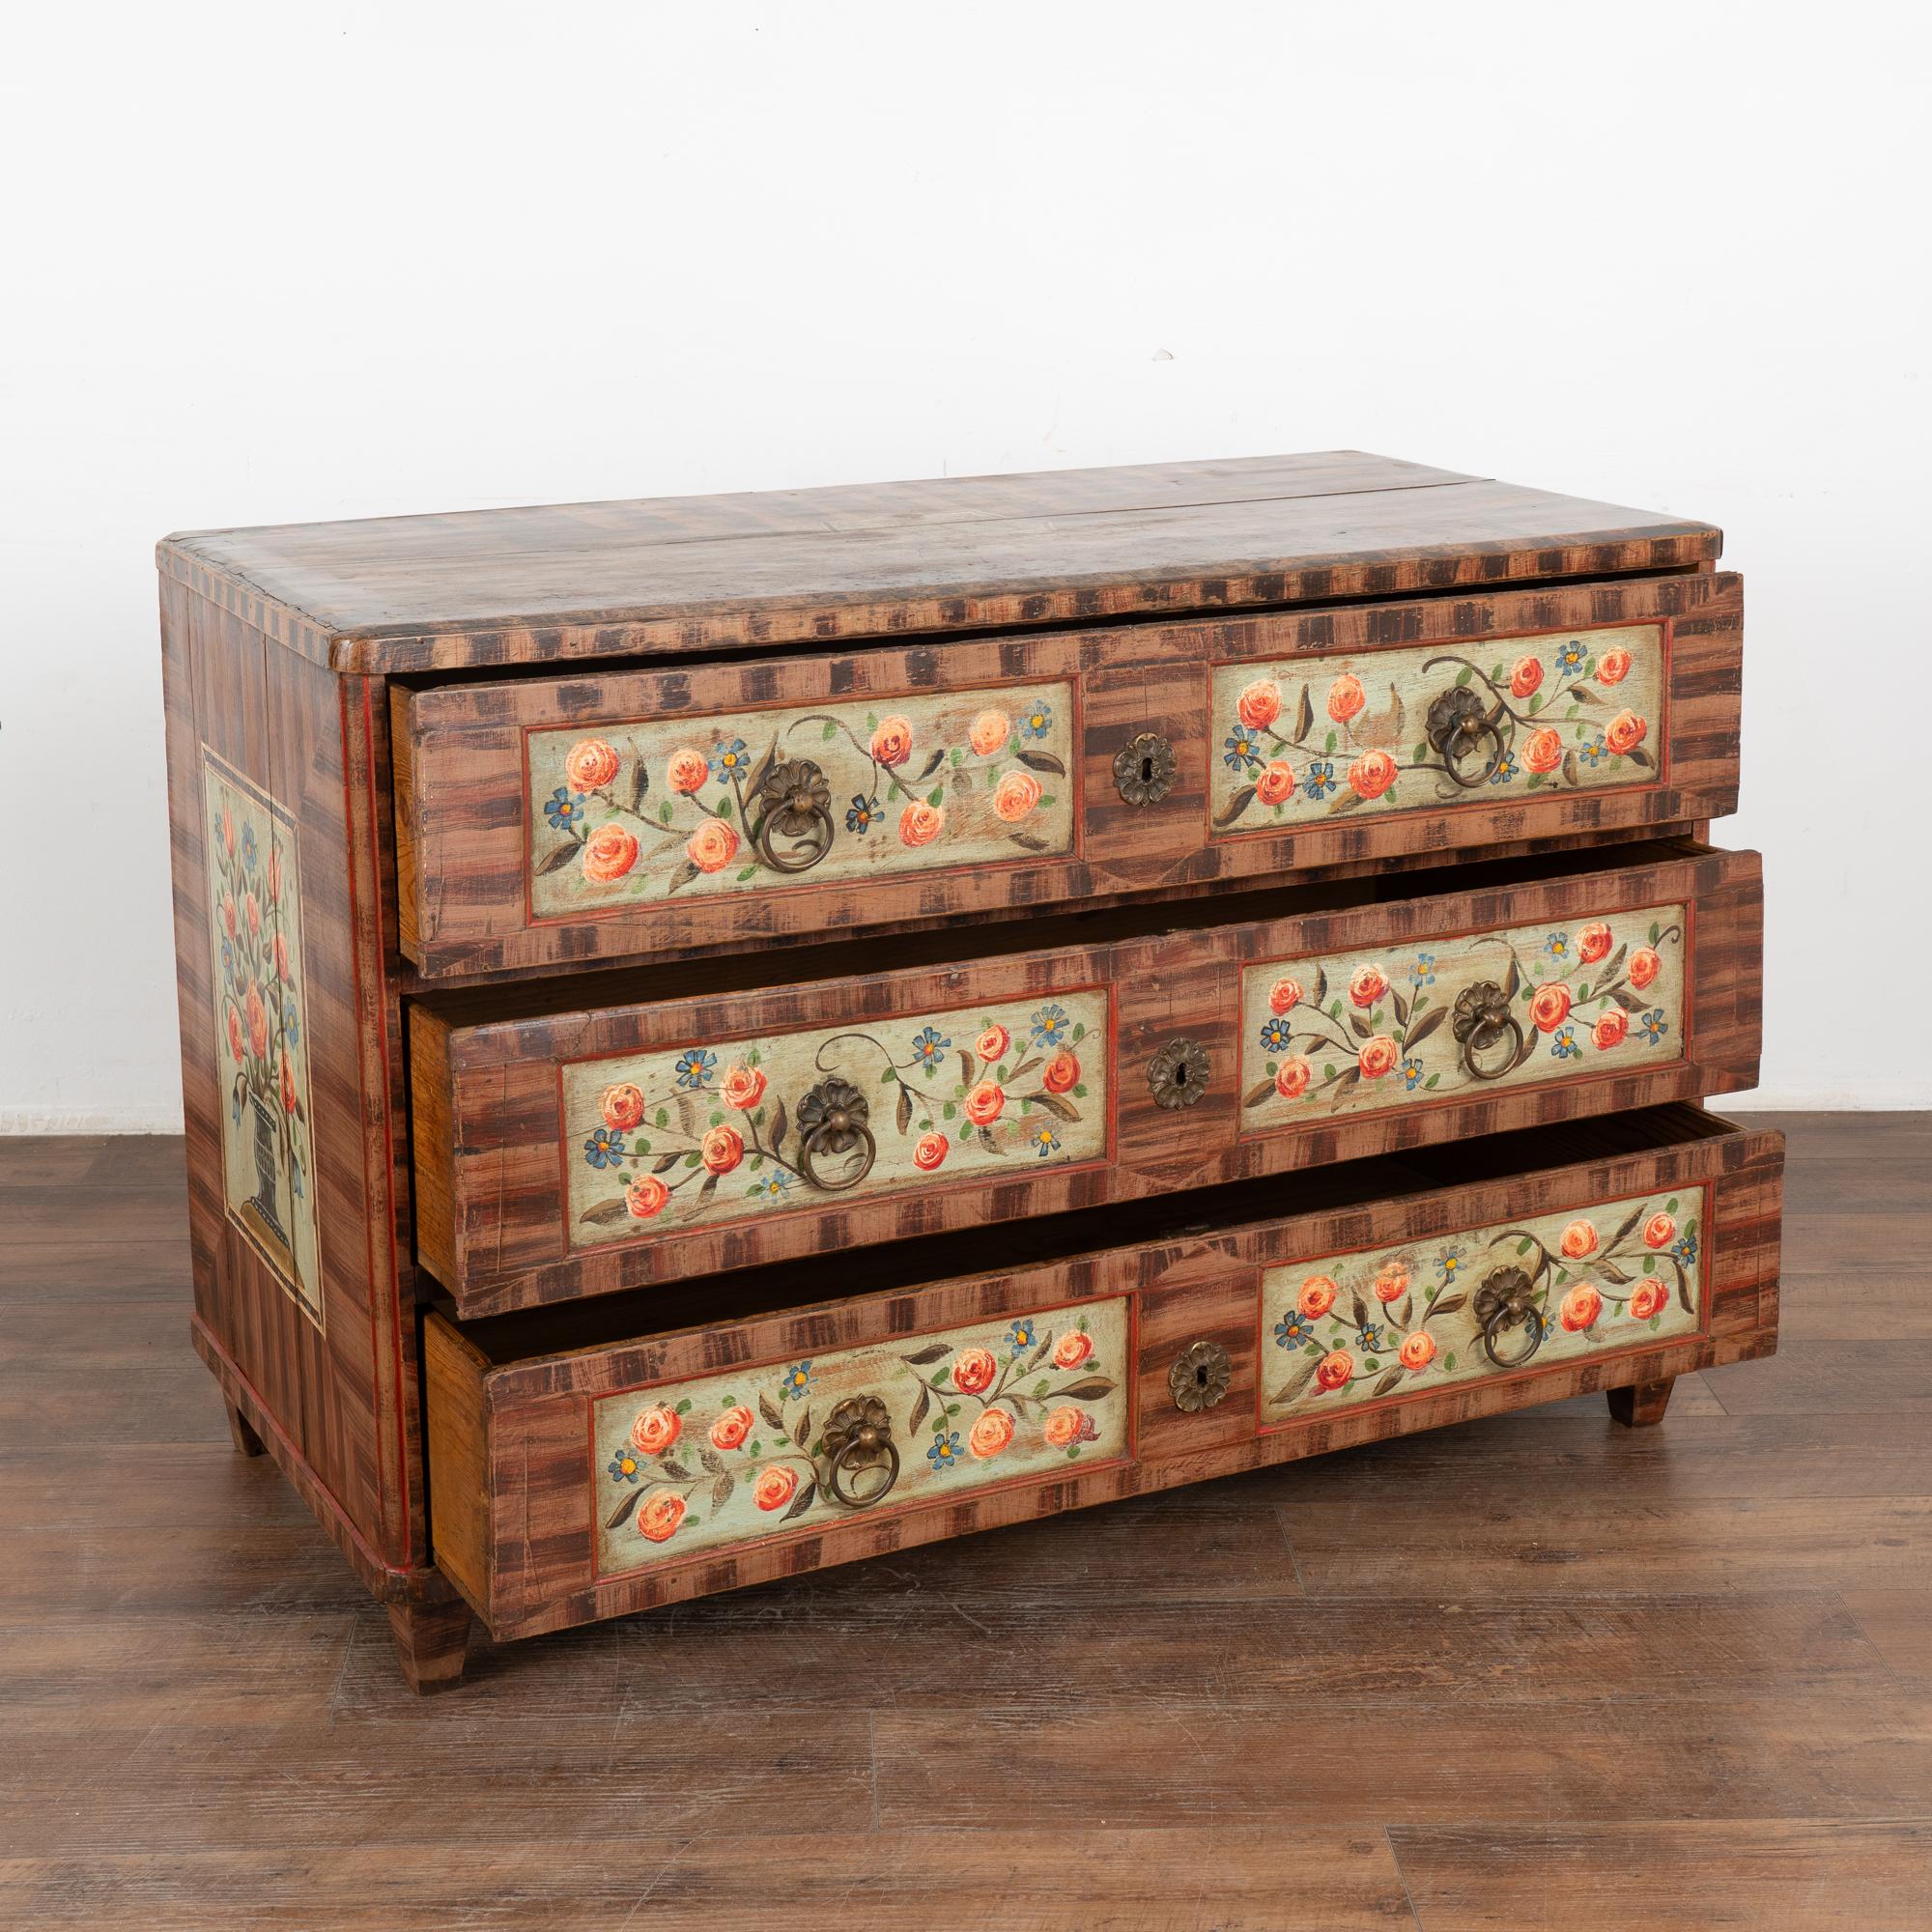 Folk Art Original Painted Chest of 3 Drawers Blanket Chest With Flowers, Circa 1860-80